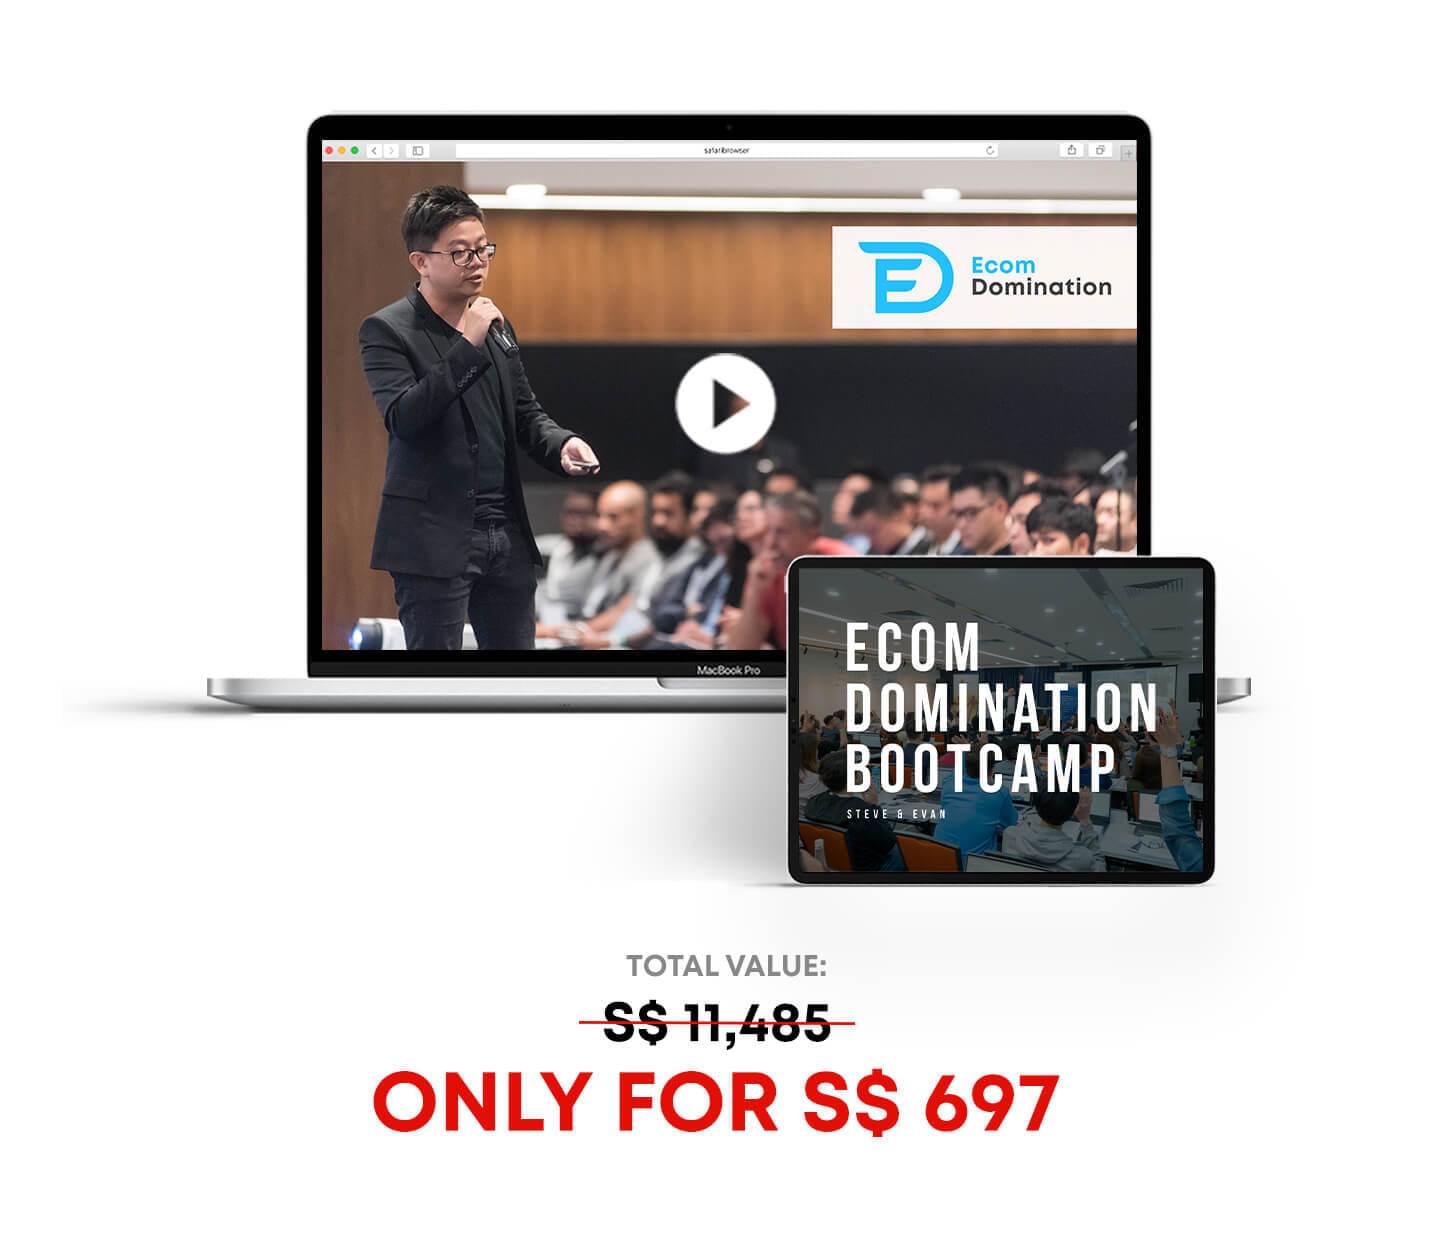 [SUPER HOT SHARE] Tan Brothers – Ecom Domination Bootcamp Download